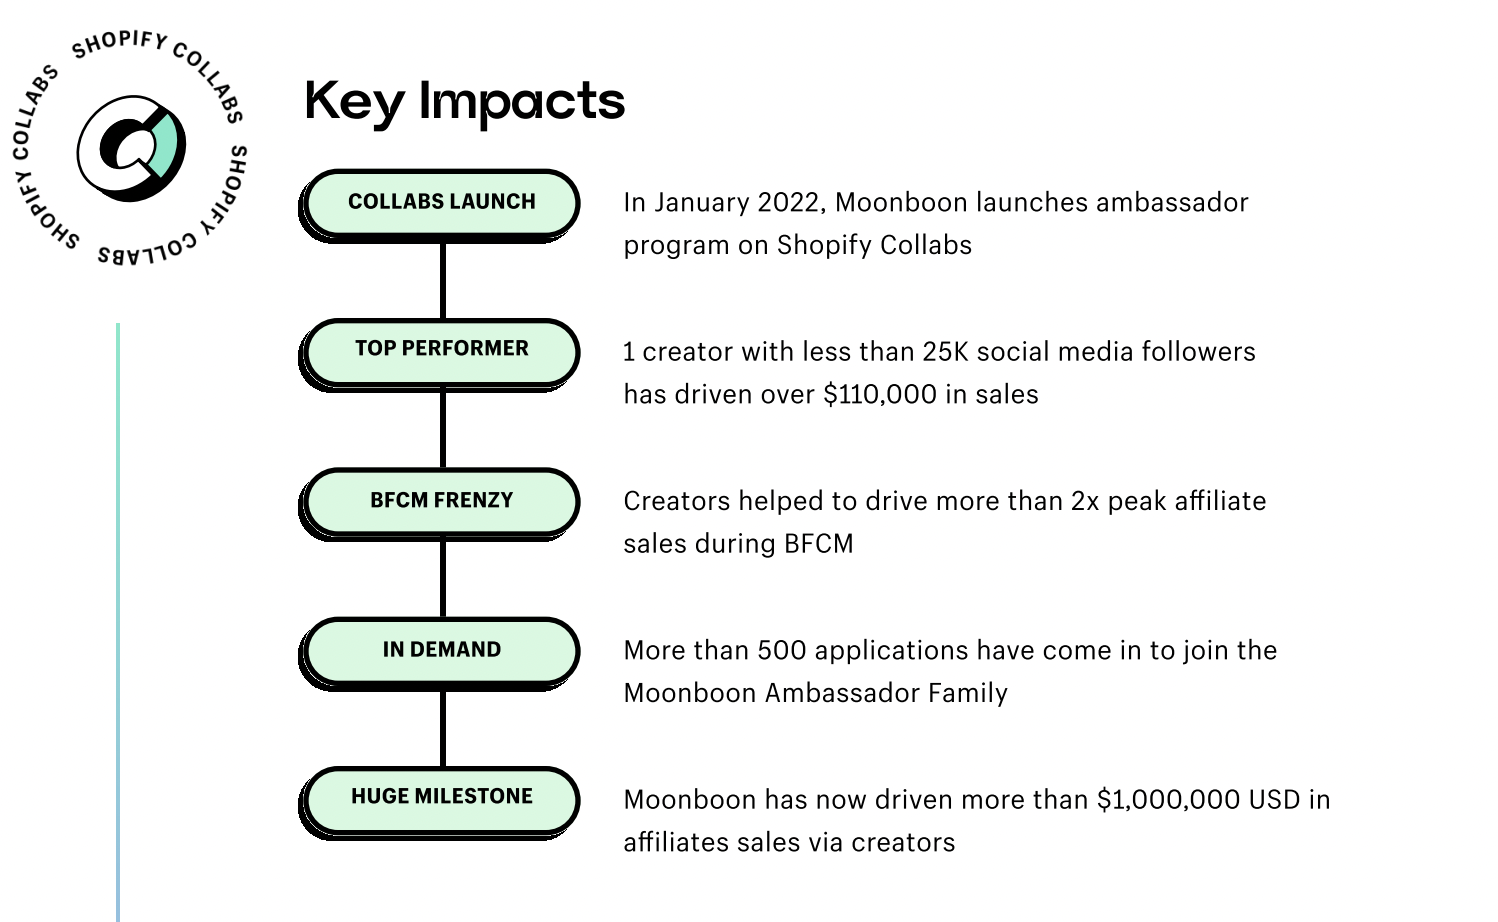 Image from Shopify Collabs case study showing Moonboon’s success with the influencer marketing platform